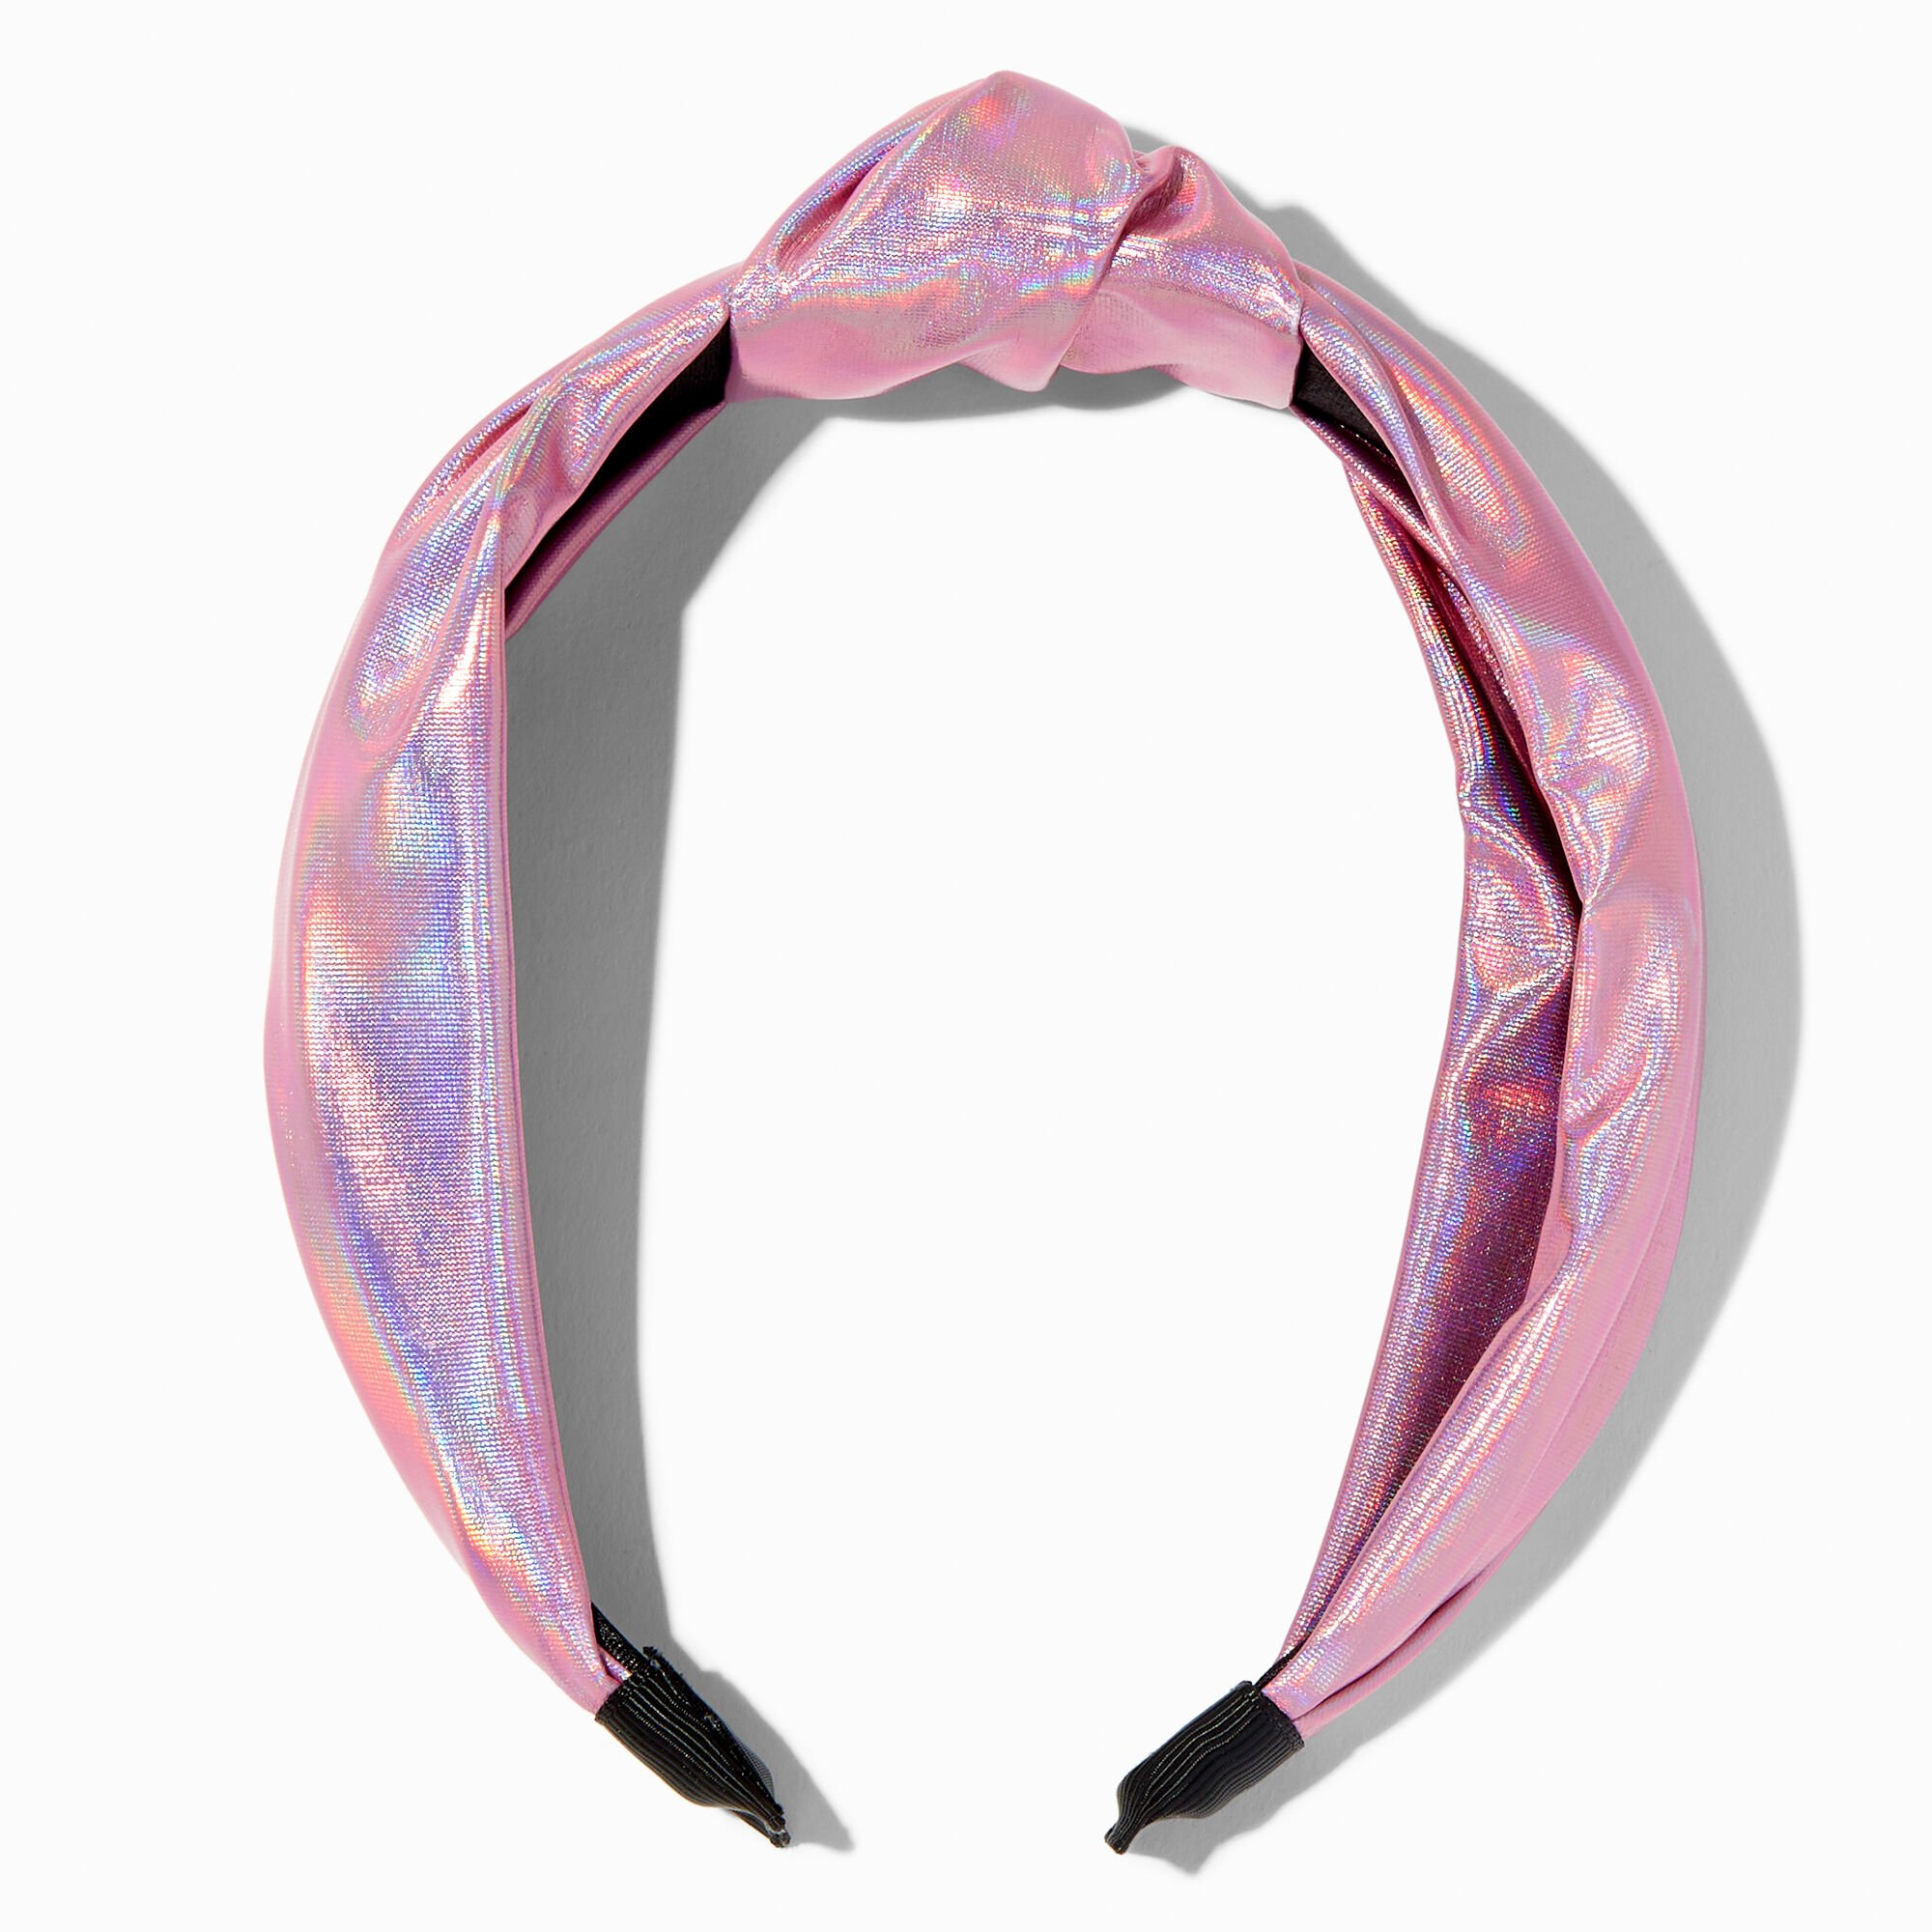 View Claires Iridescent Satin Knotted Headband Pink information